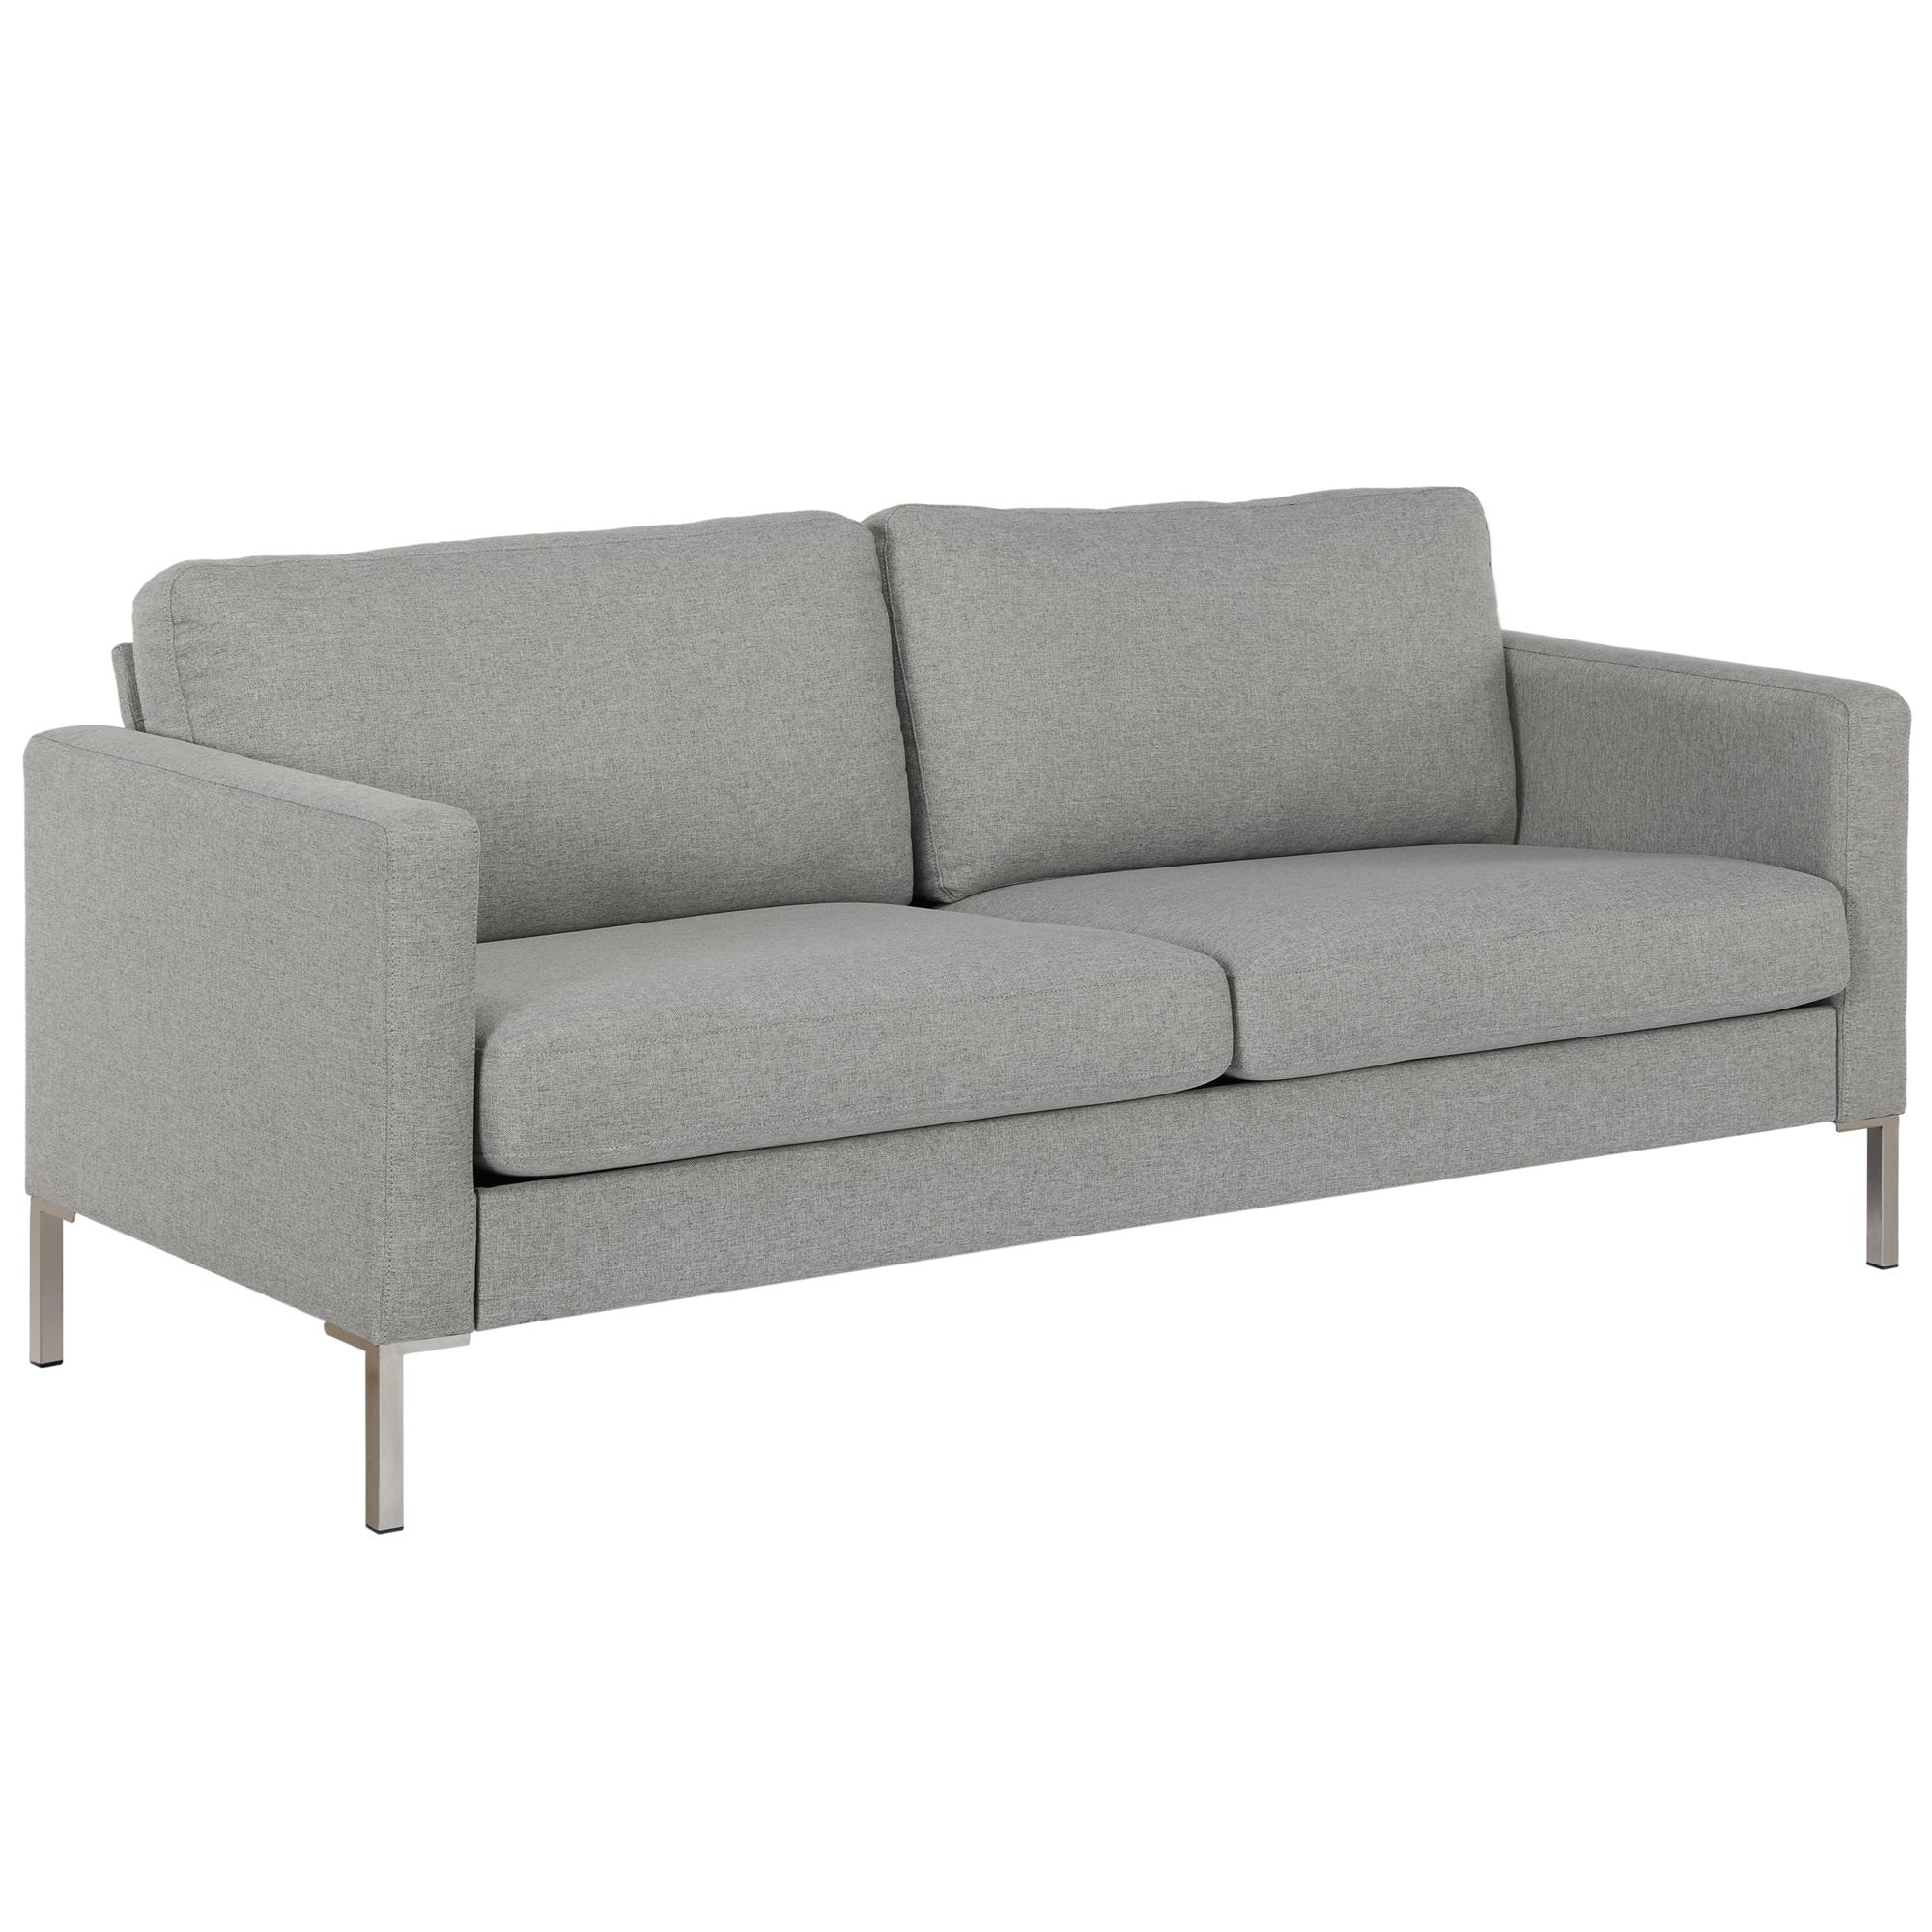 DHP Lexington Modern Sofa & Couch, Living Room Furniture, Gray Linen - image 5 of 15